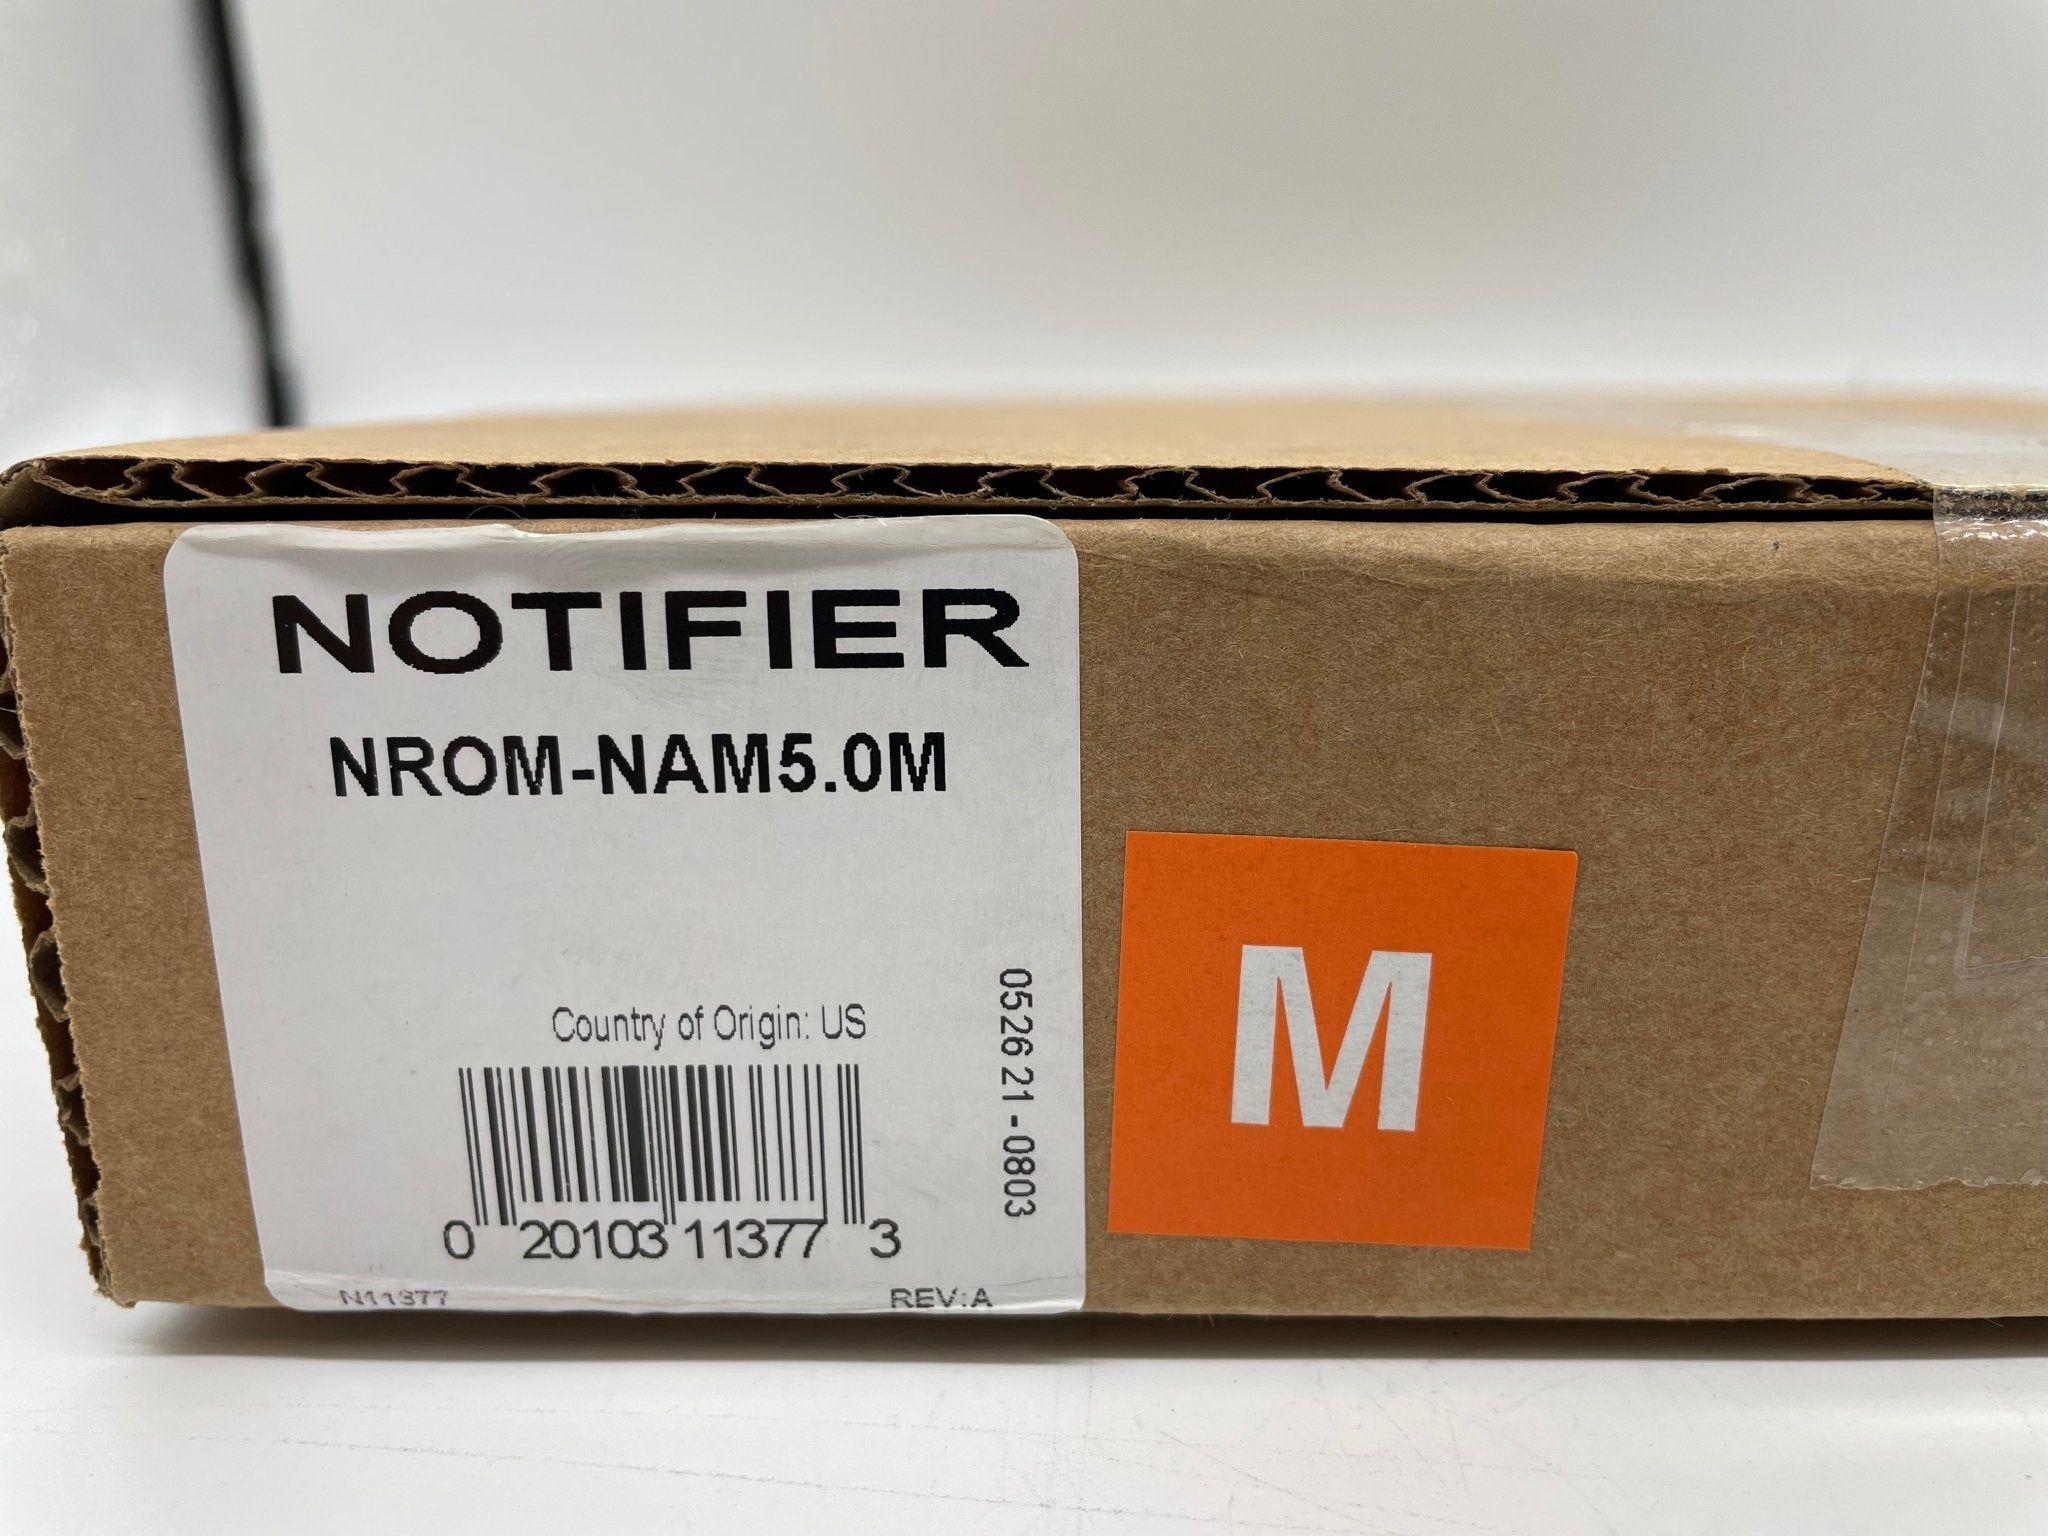 Notifier NROM-NAM5.0M - The Fire Alarm Supplier